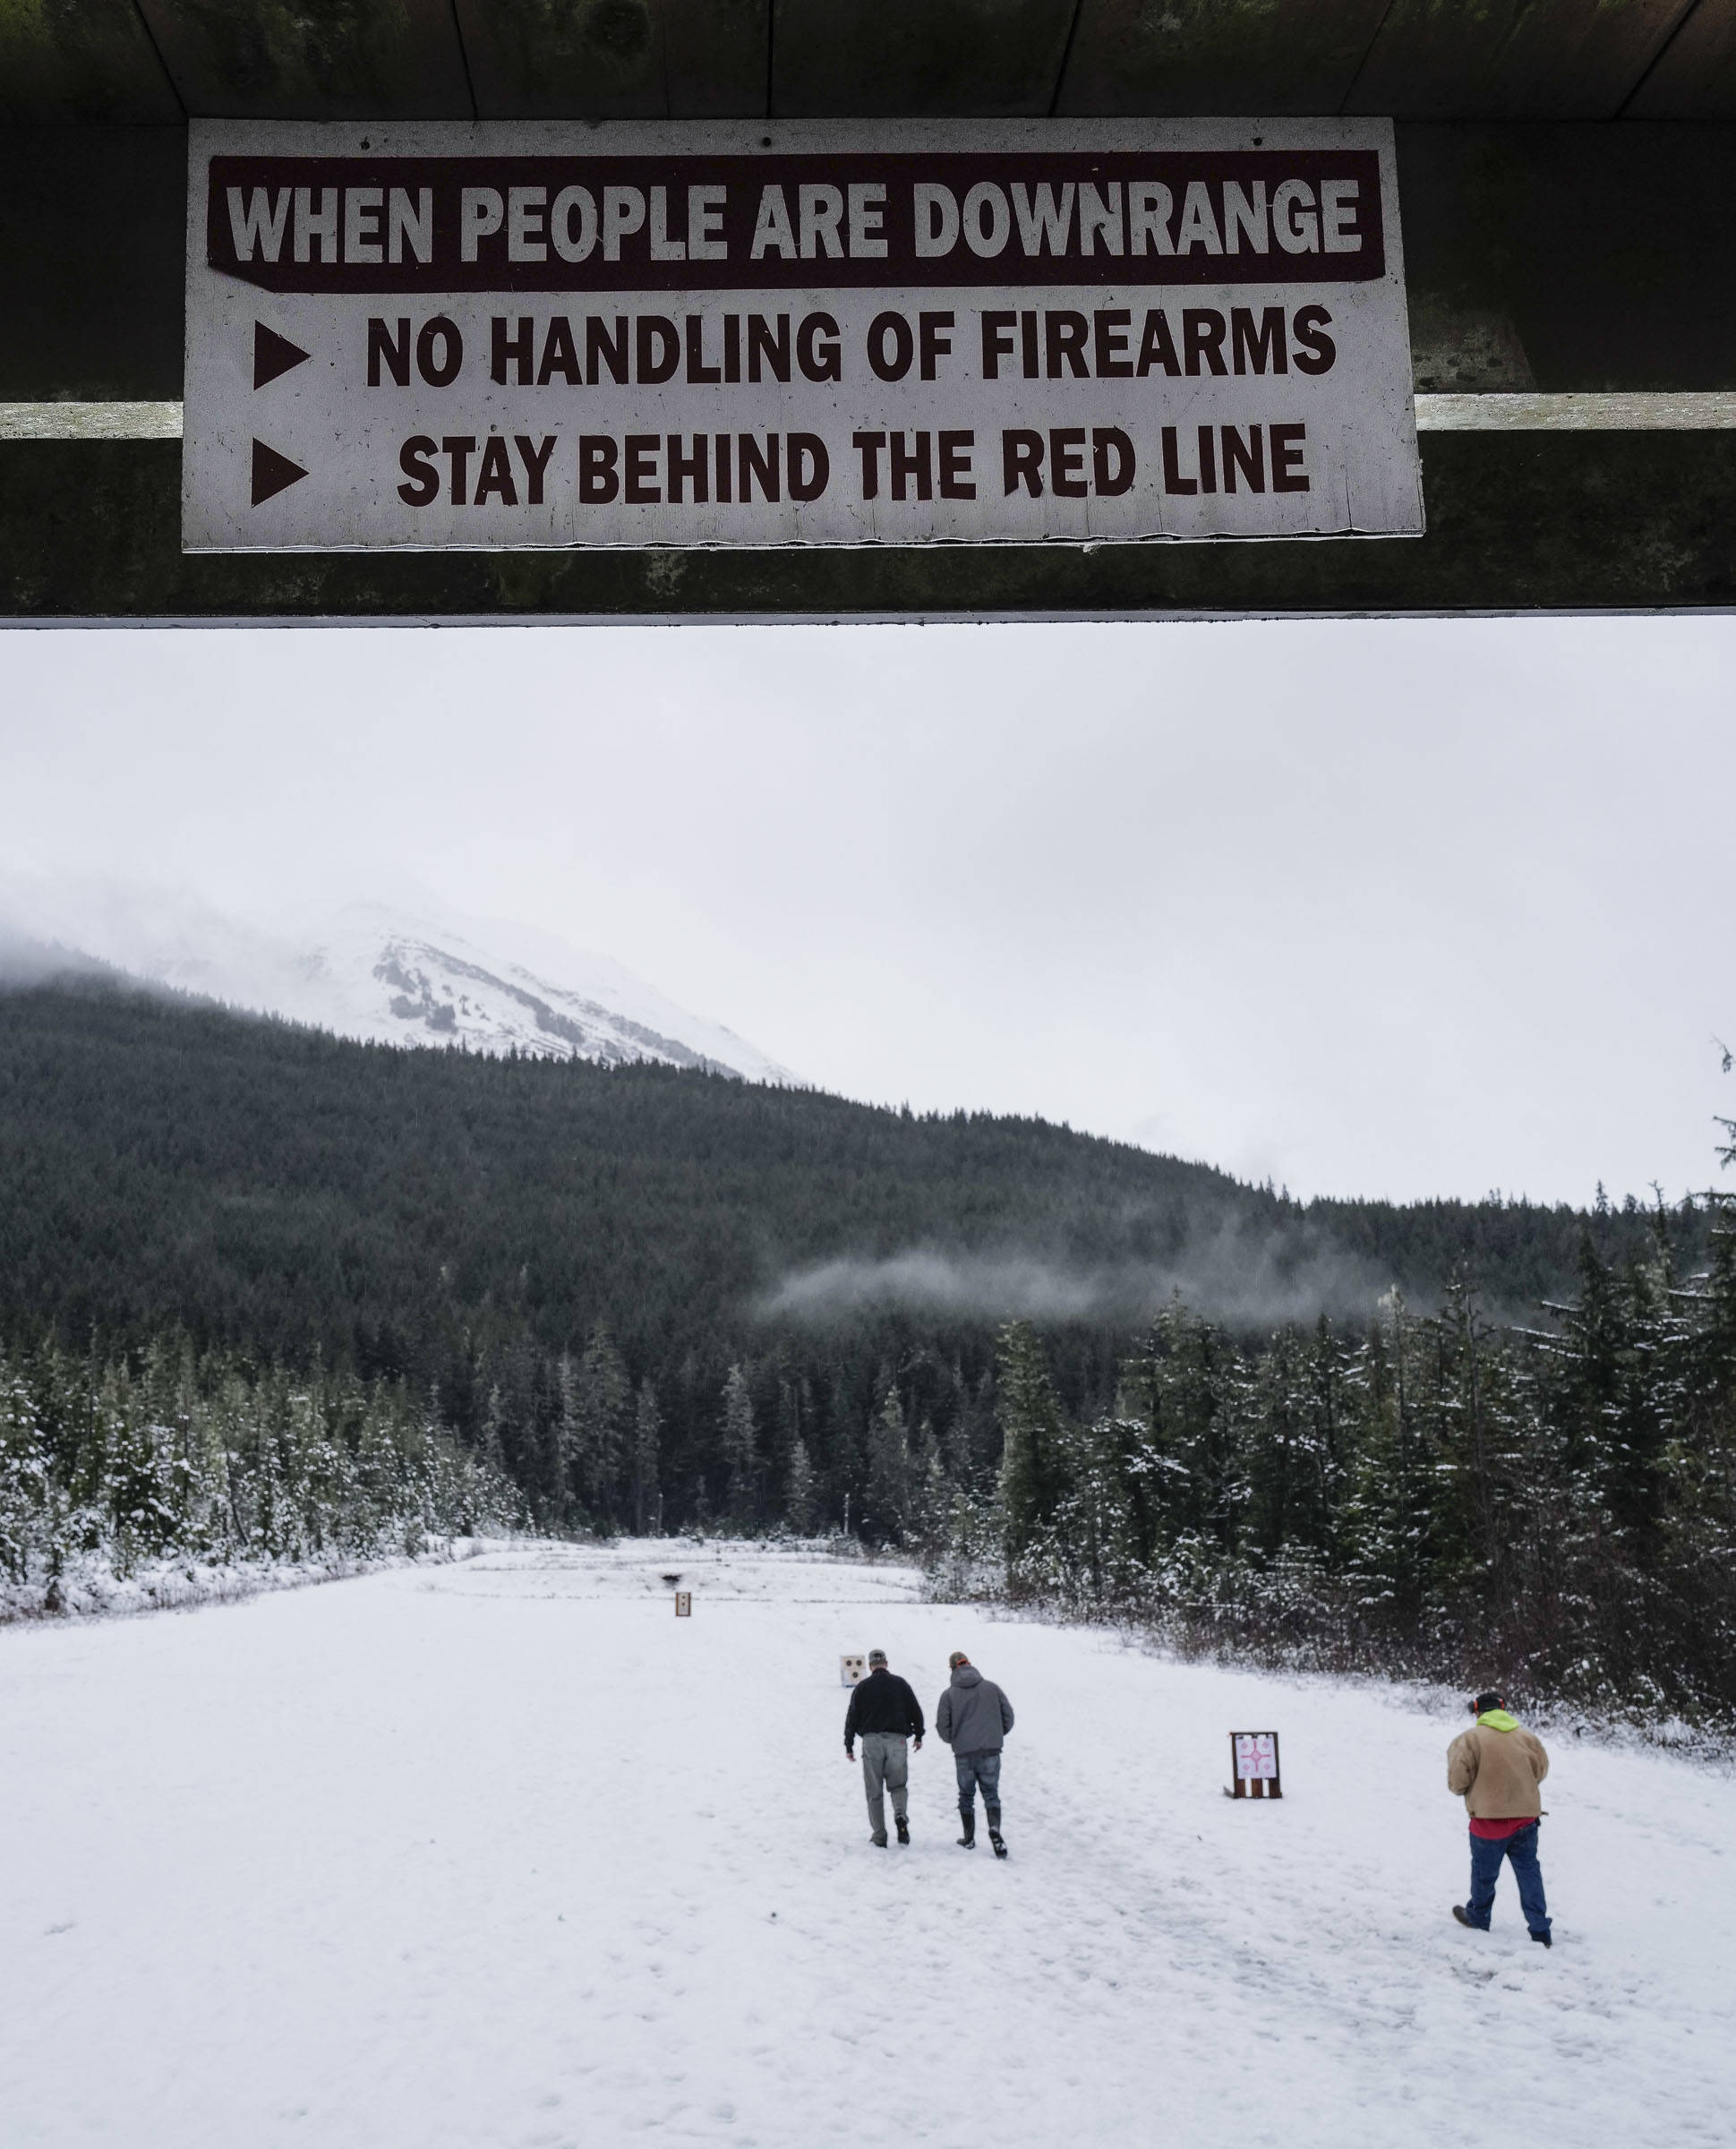 Shooters check on their targets at the Hank Harmon Rifle Range on Montana Creek Road on Wednesday, Dec. 18, 2019. (Michael Penn | Juneau Empire)